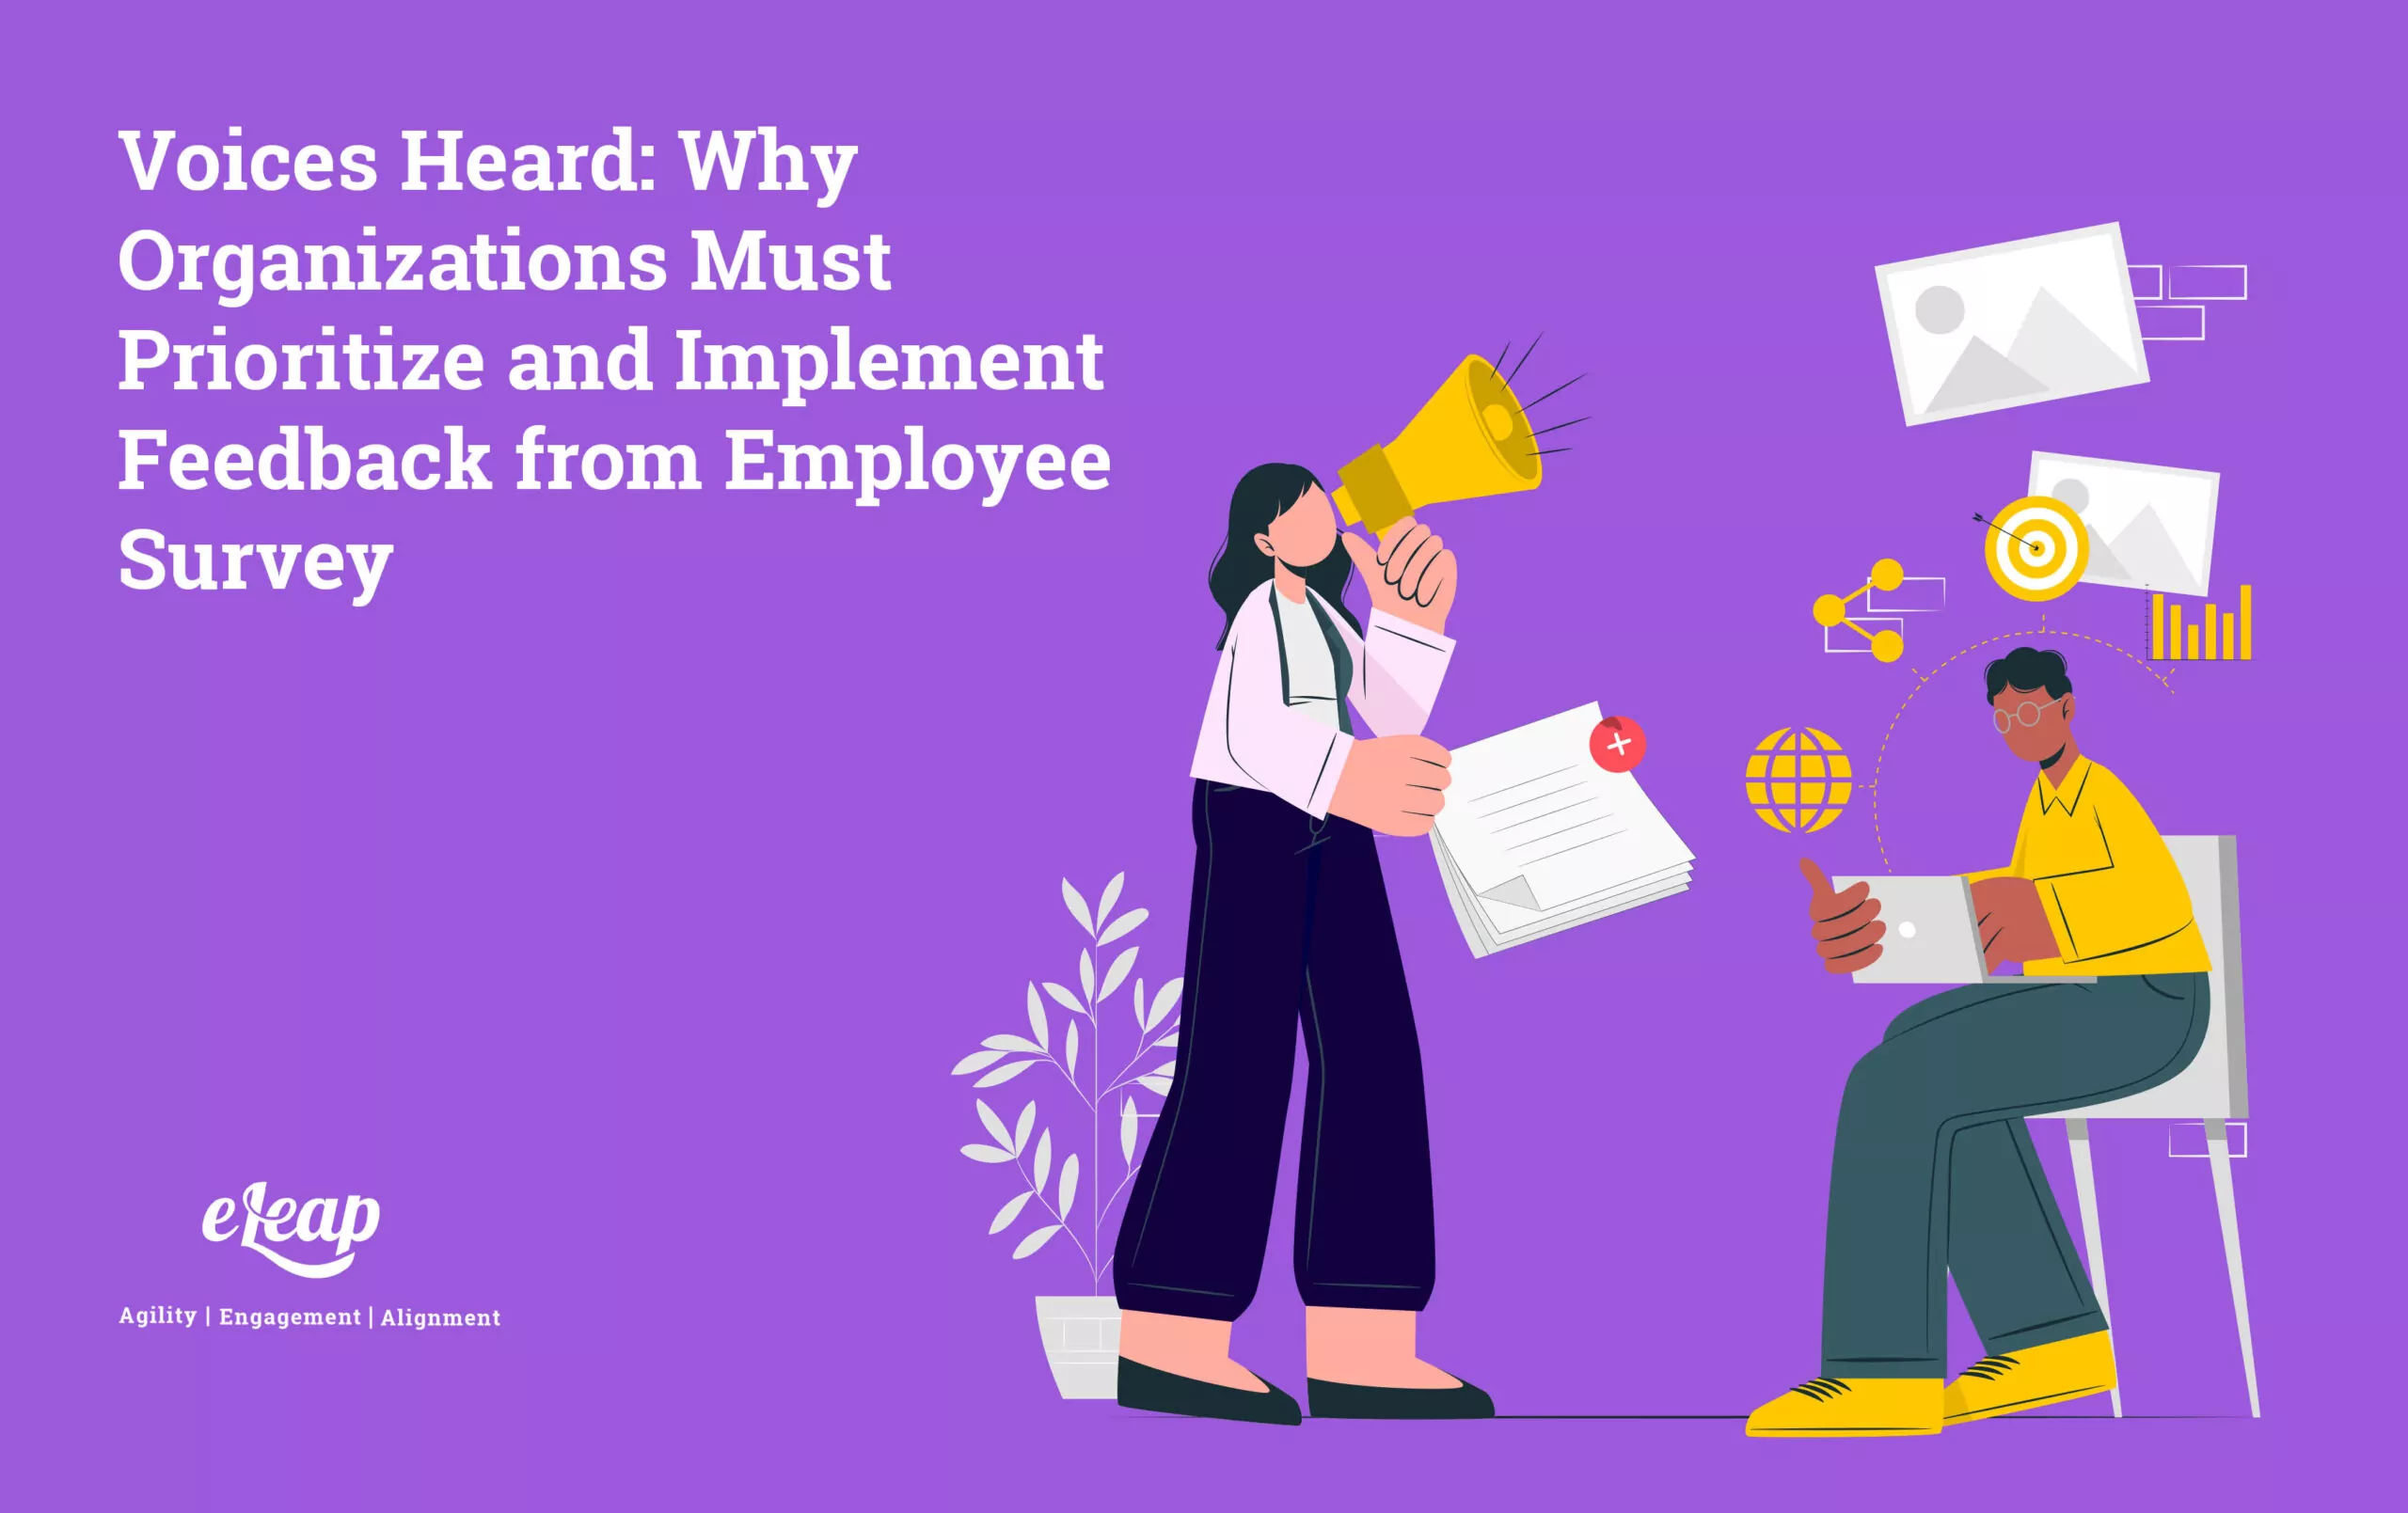 Voices Heard: Why Organizations Must Prioritize and Implement Feedback from Employee Surveys